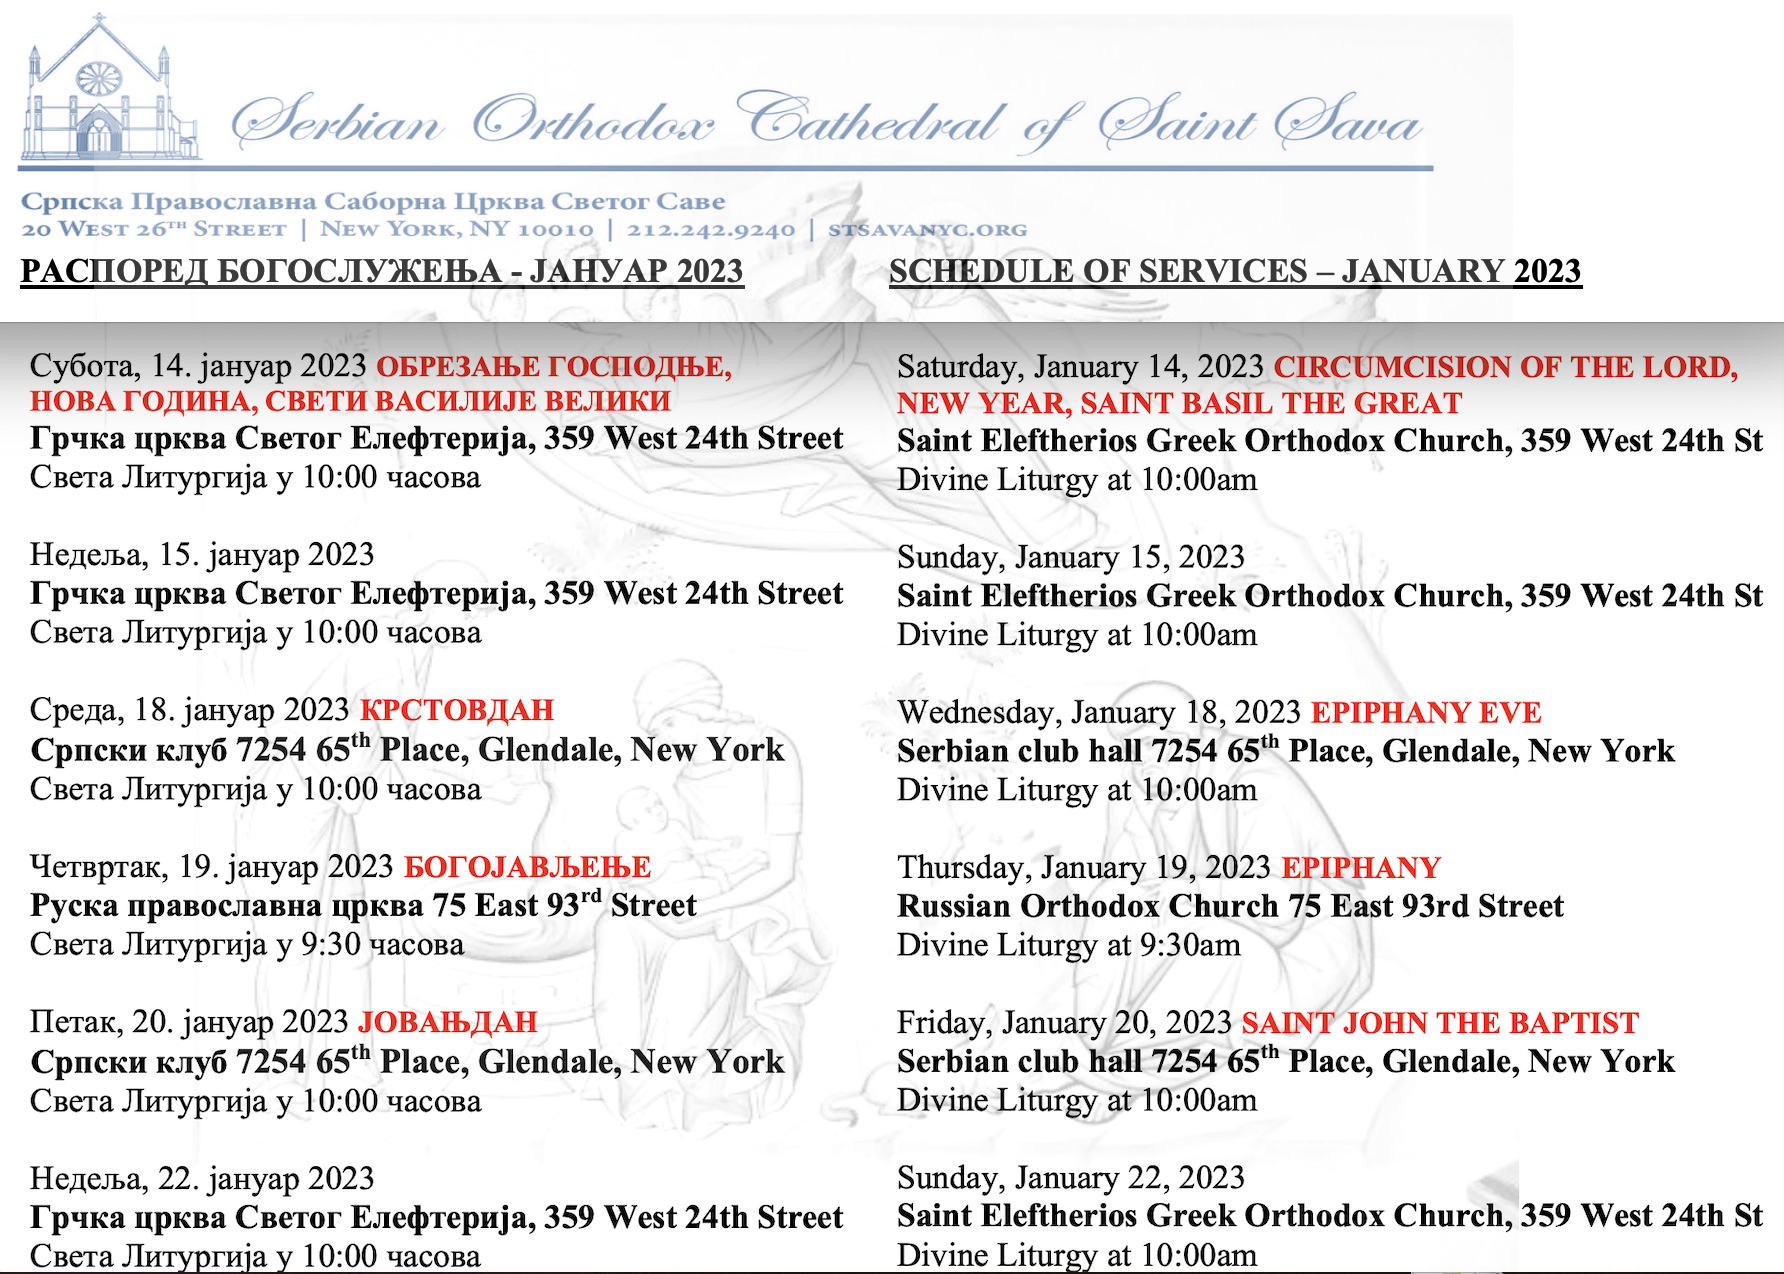 SCHEDULE OF SERVICES